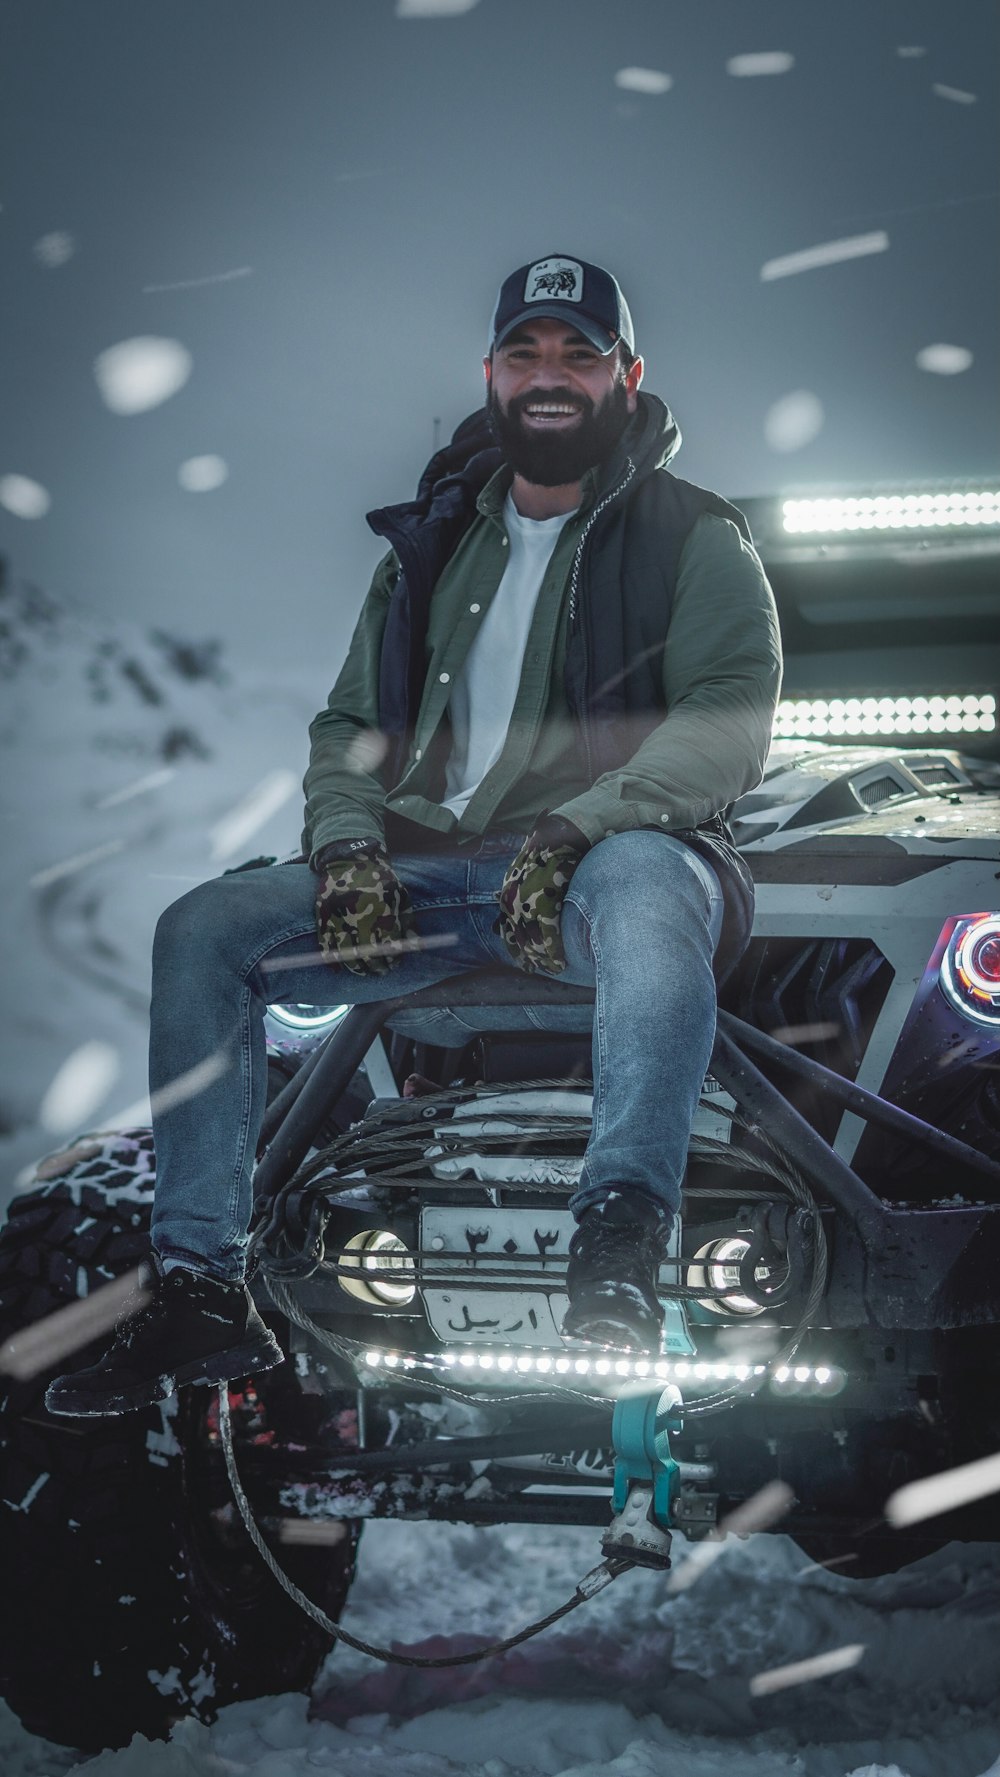 a man sitting on top of a motorcycle in the snow